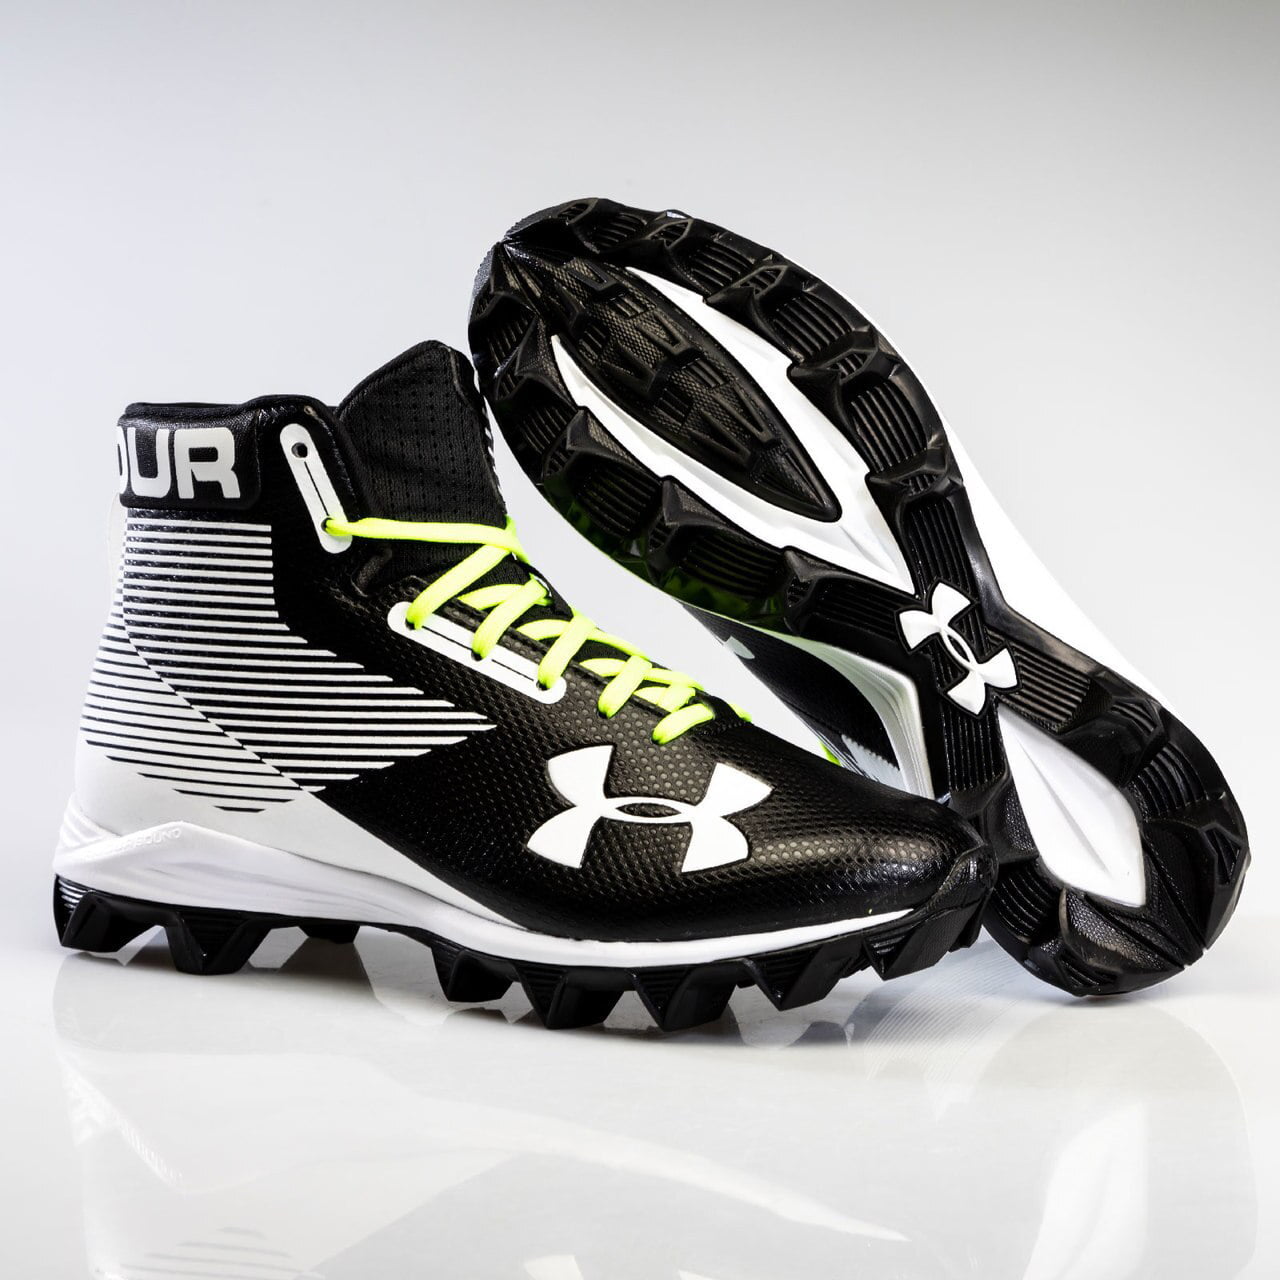 Under Armour Hammer Mid Jr Football Cleats 2Y WIDE Black/White FREE SHIPPING 